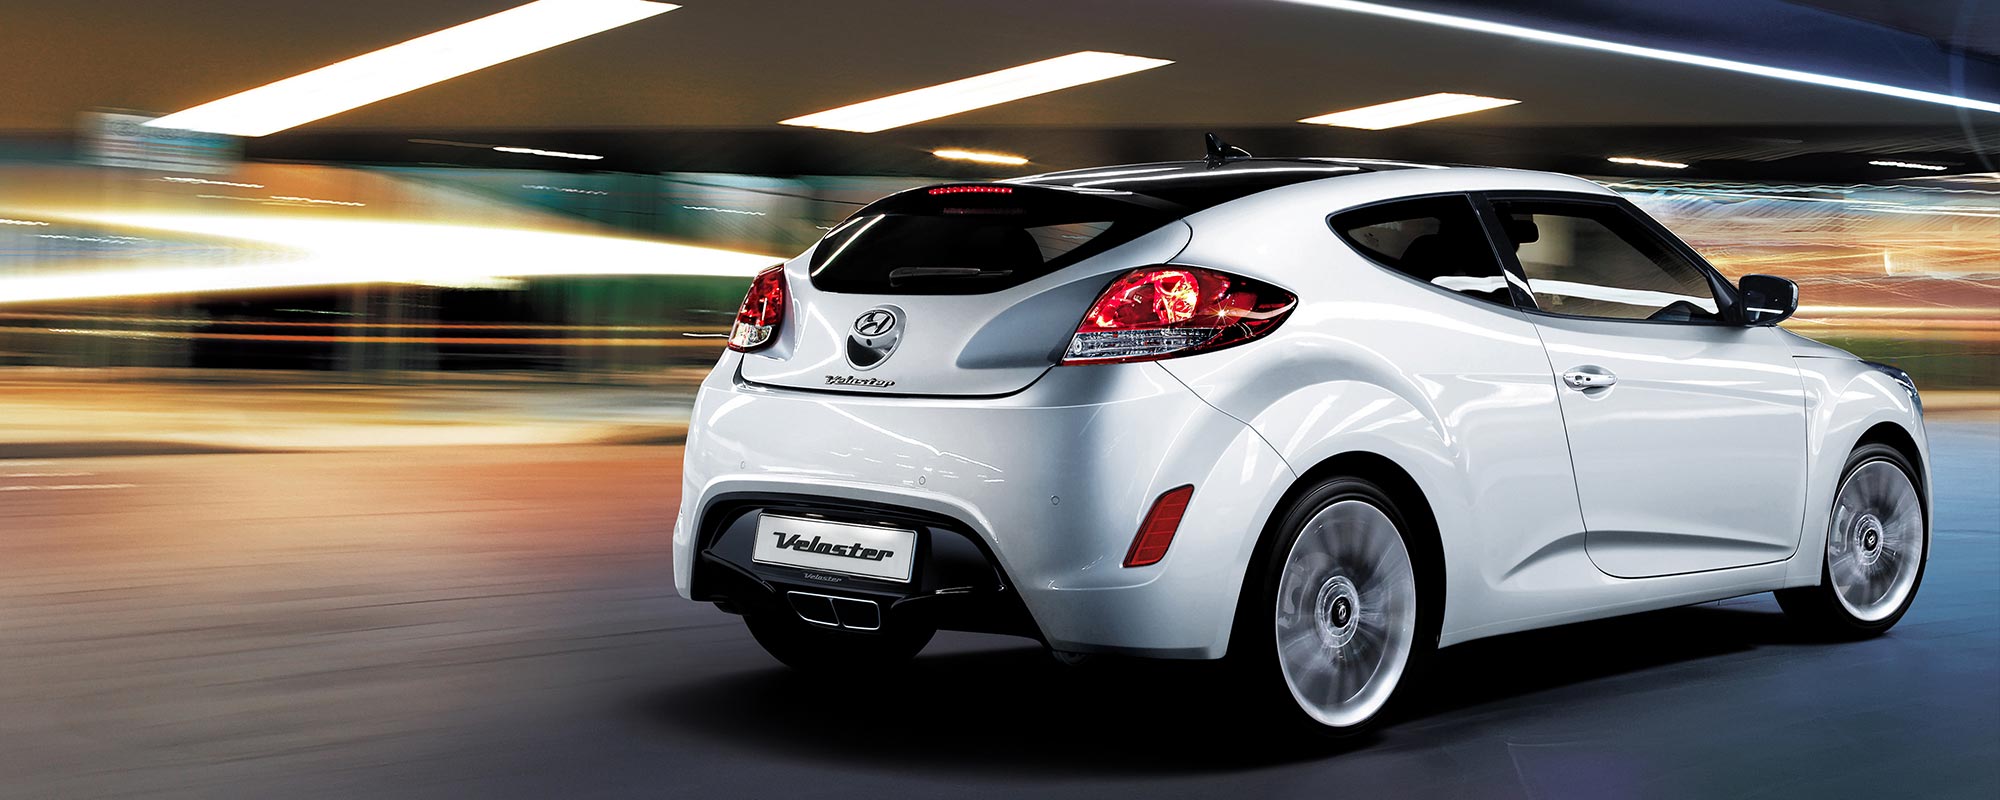 Hyundai Veloster Backgrounds on Wallpapers Vista